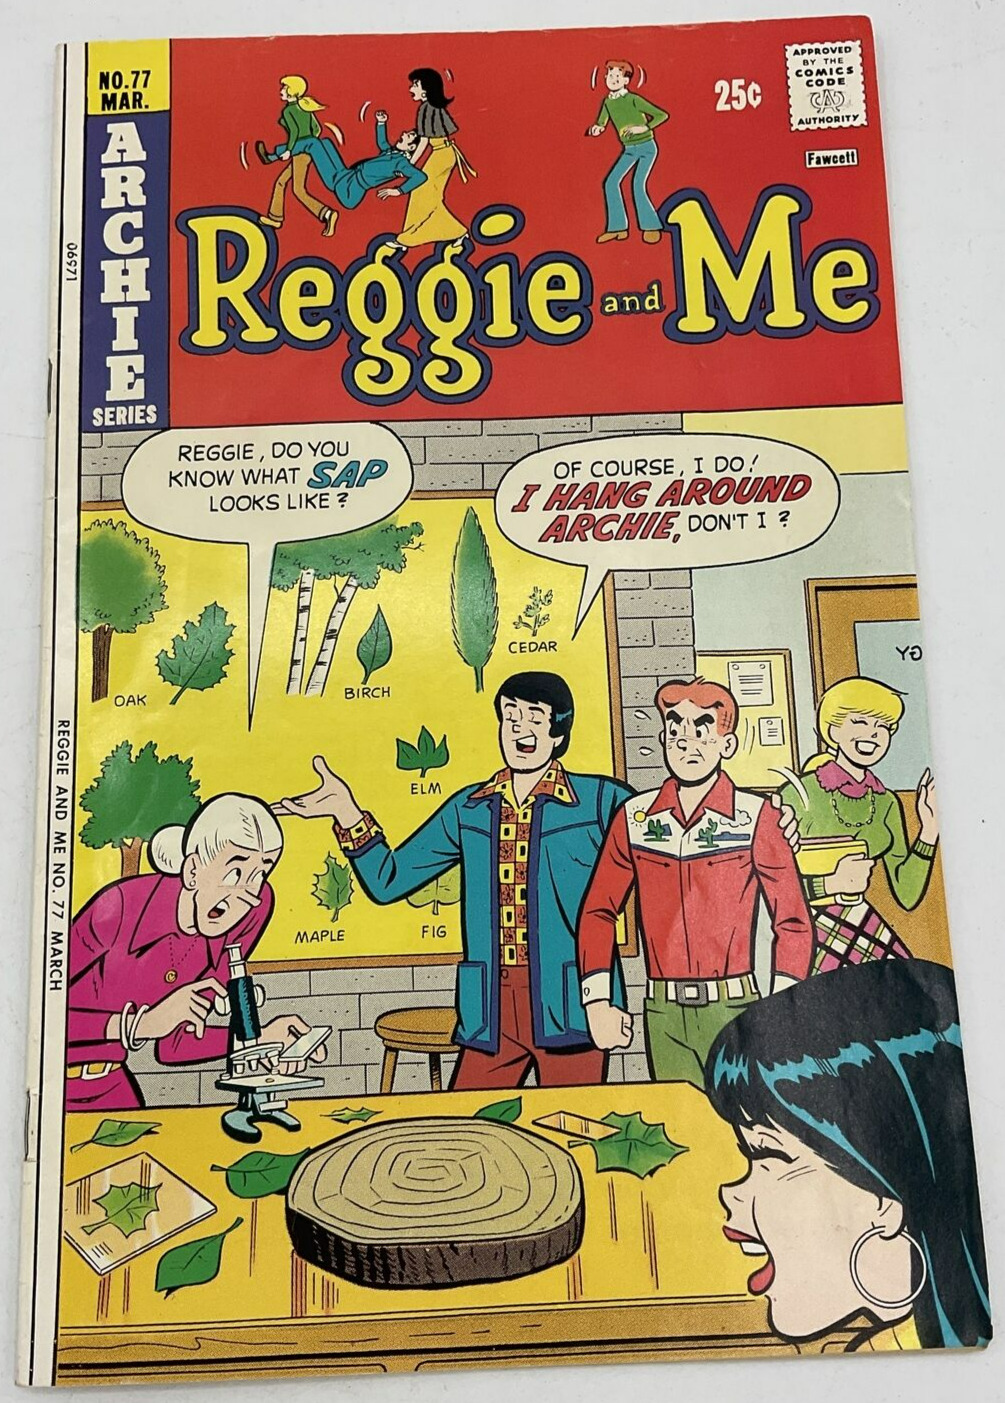 Reggie and Me Archie Series No. 77 March 1975 Sea Monkeys Beatles Dog Tags